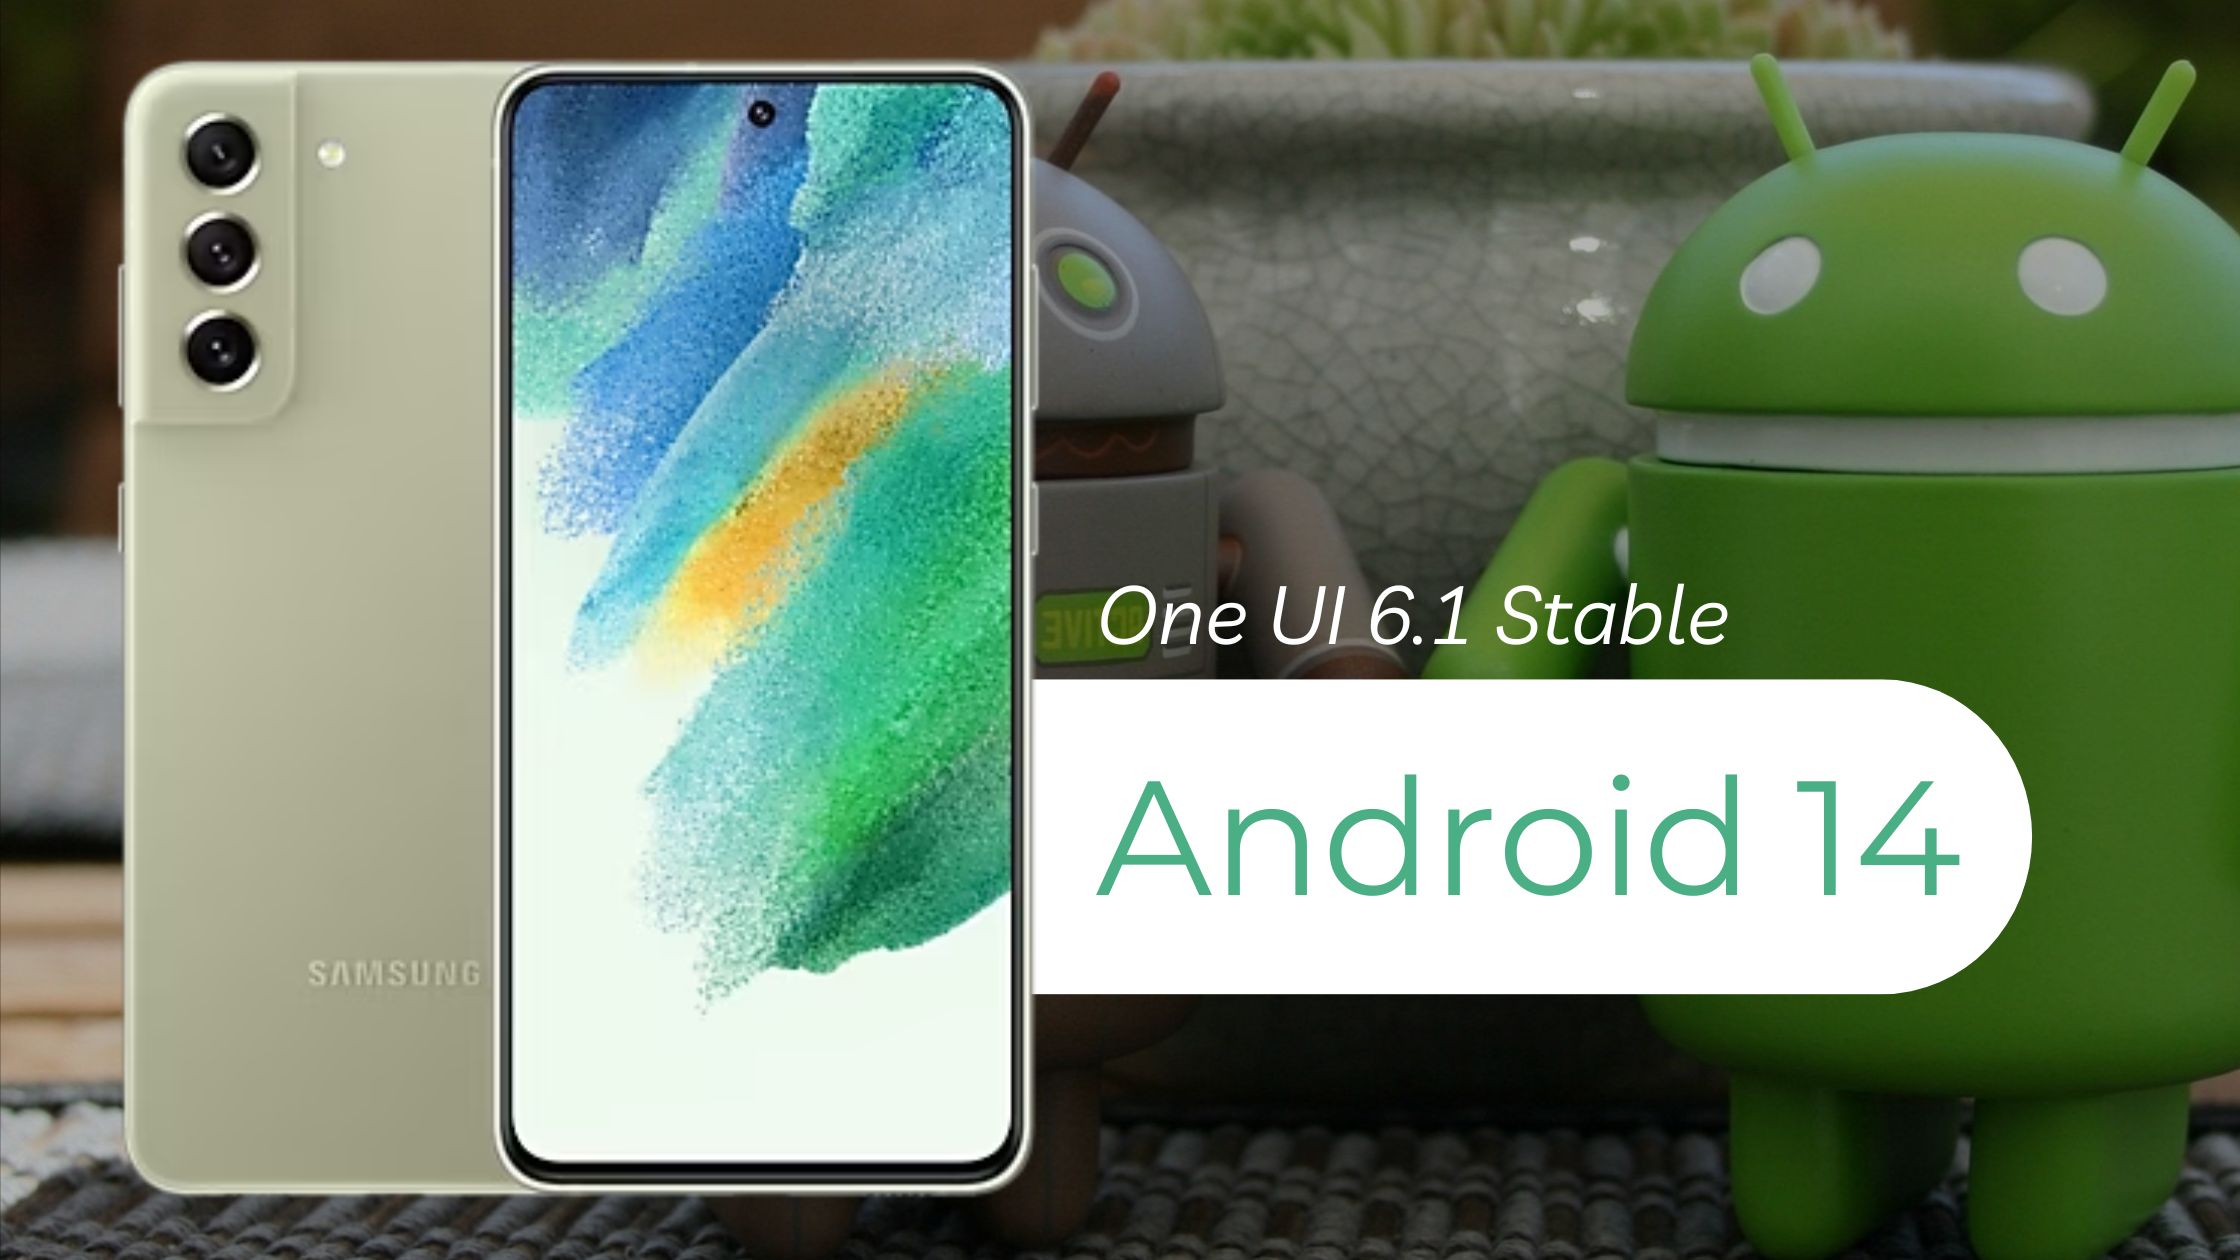 Android 14 Based One UI 6.1 Stable